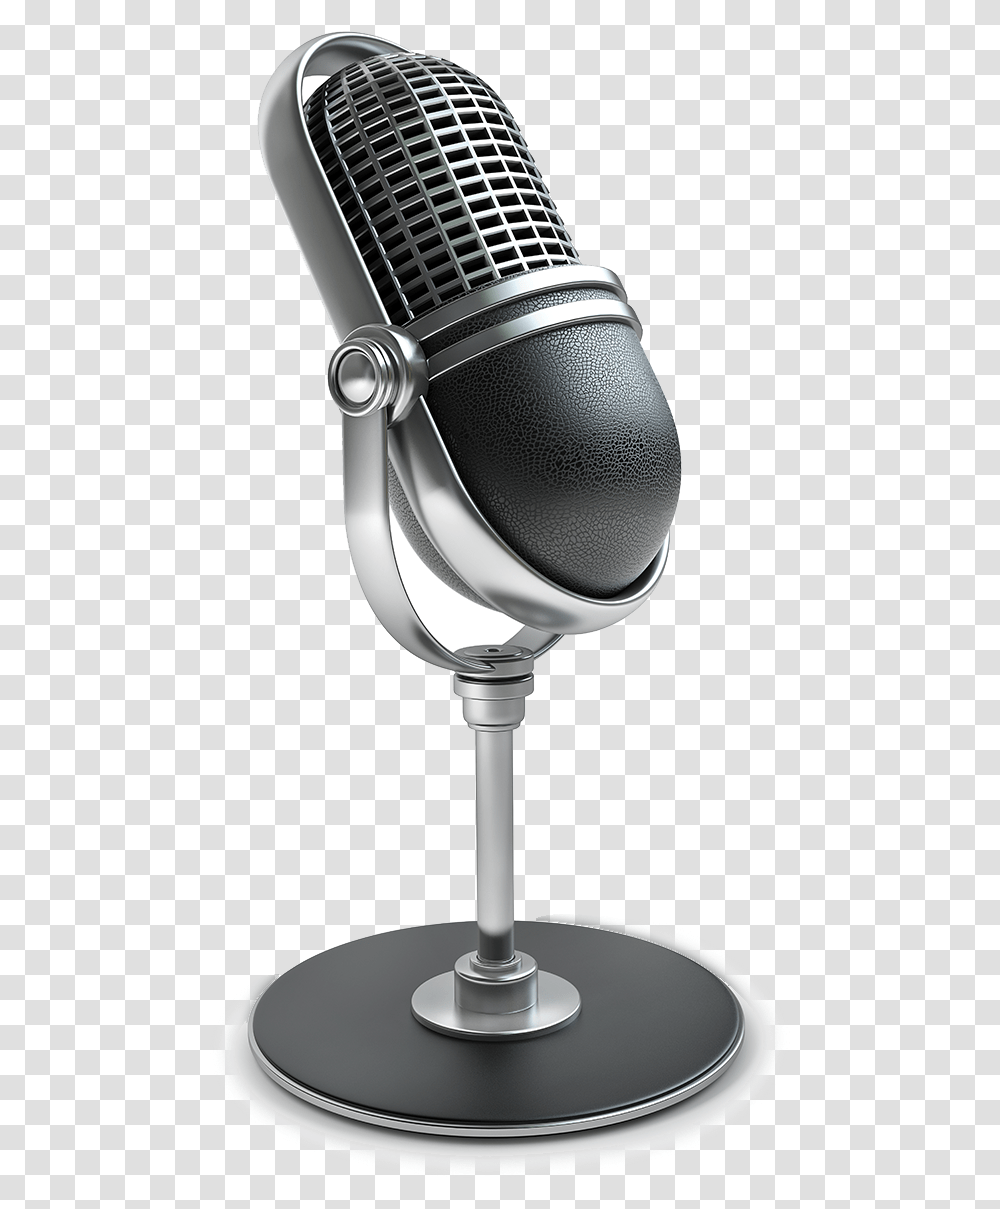 Download Full Size Image Pngkit Air Microphone, Lamp, Electrical Device, Lighting, Spotlight Transparent Png